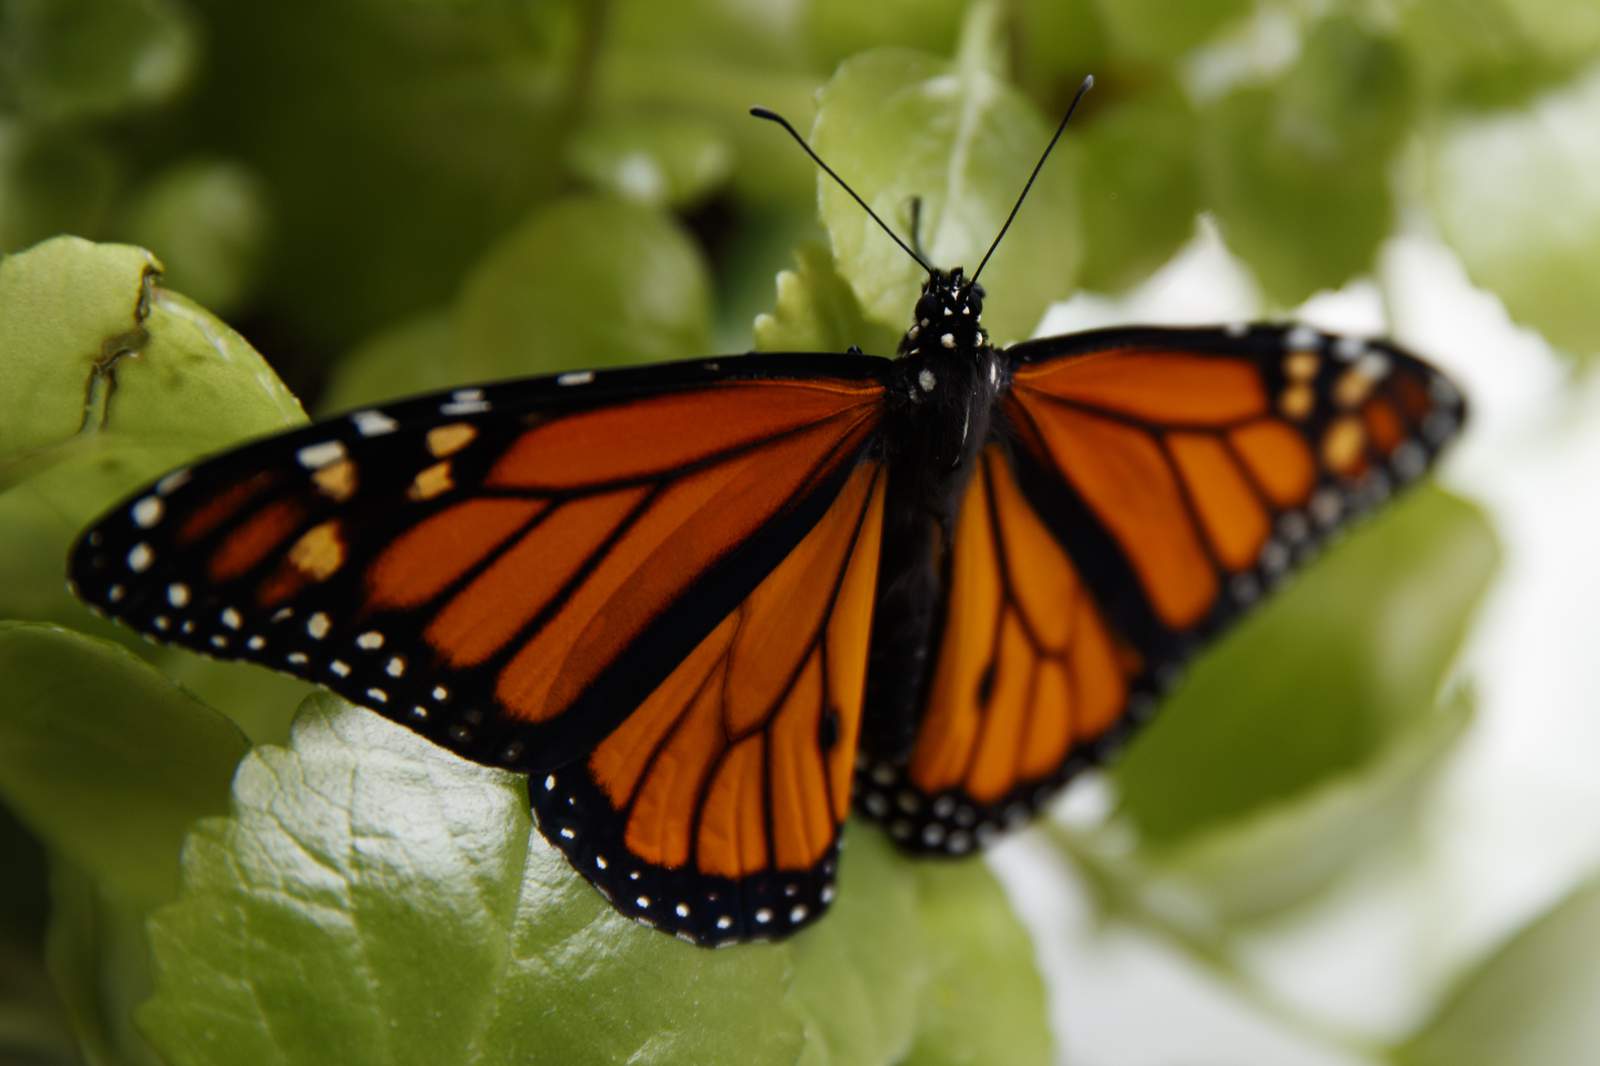 Feds to delay seeking legal protection for monarch butterfly